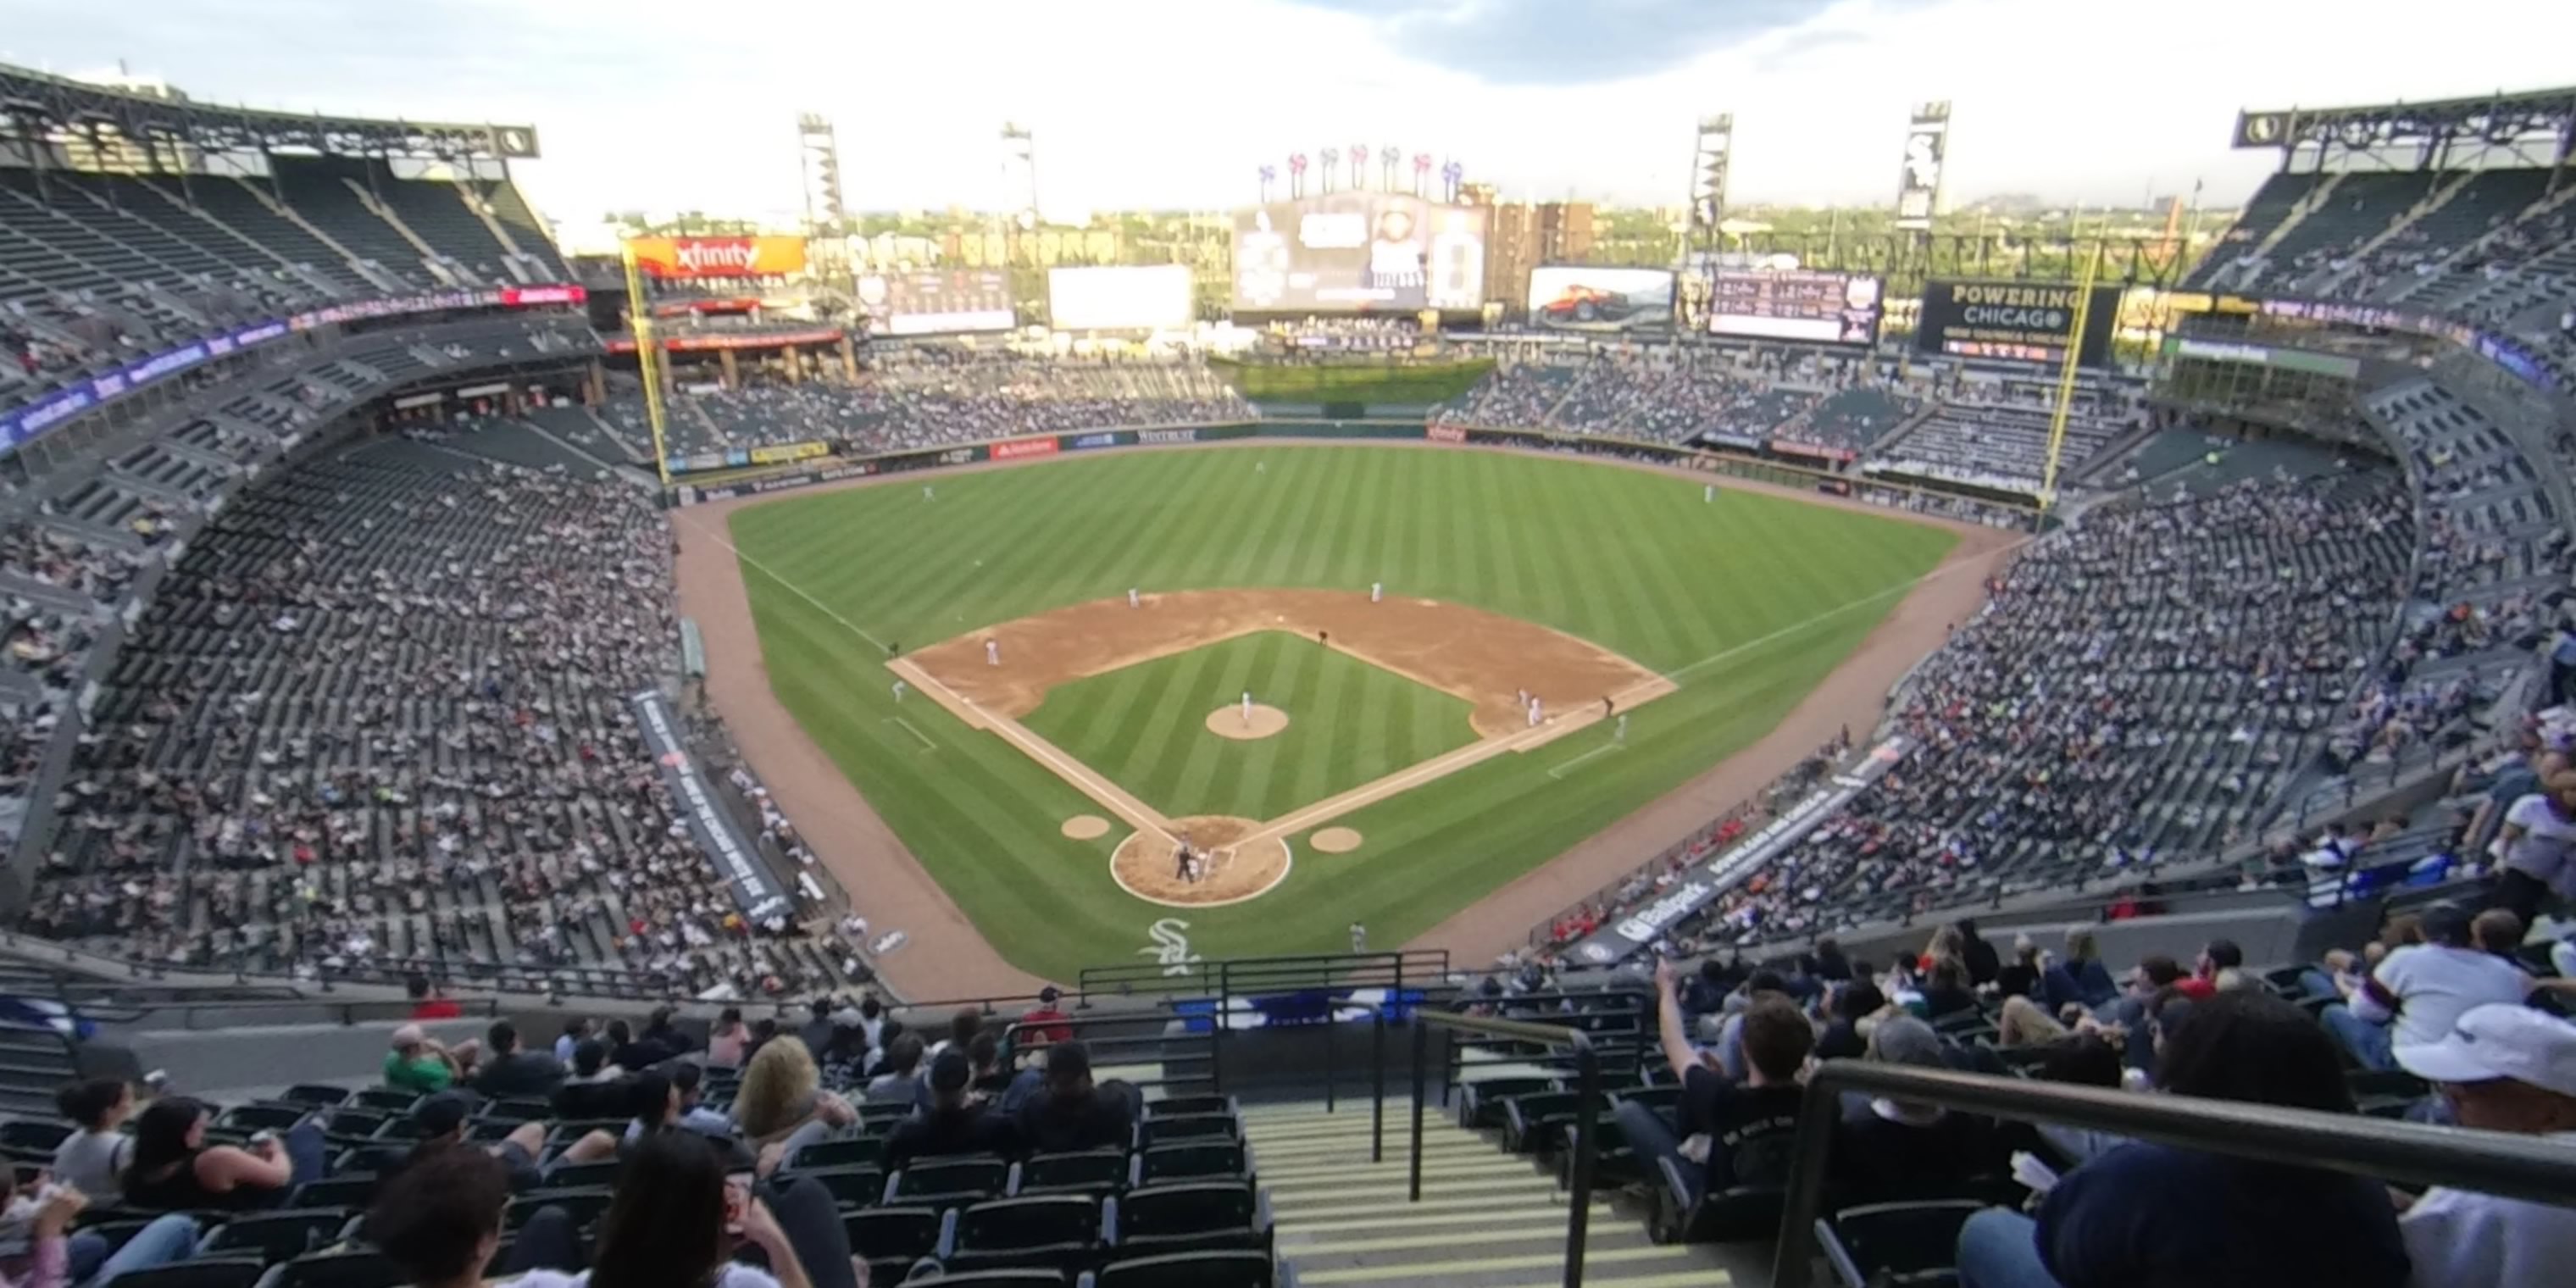 section 530 panoramic seat view  - guaranteed rate field